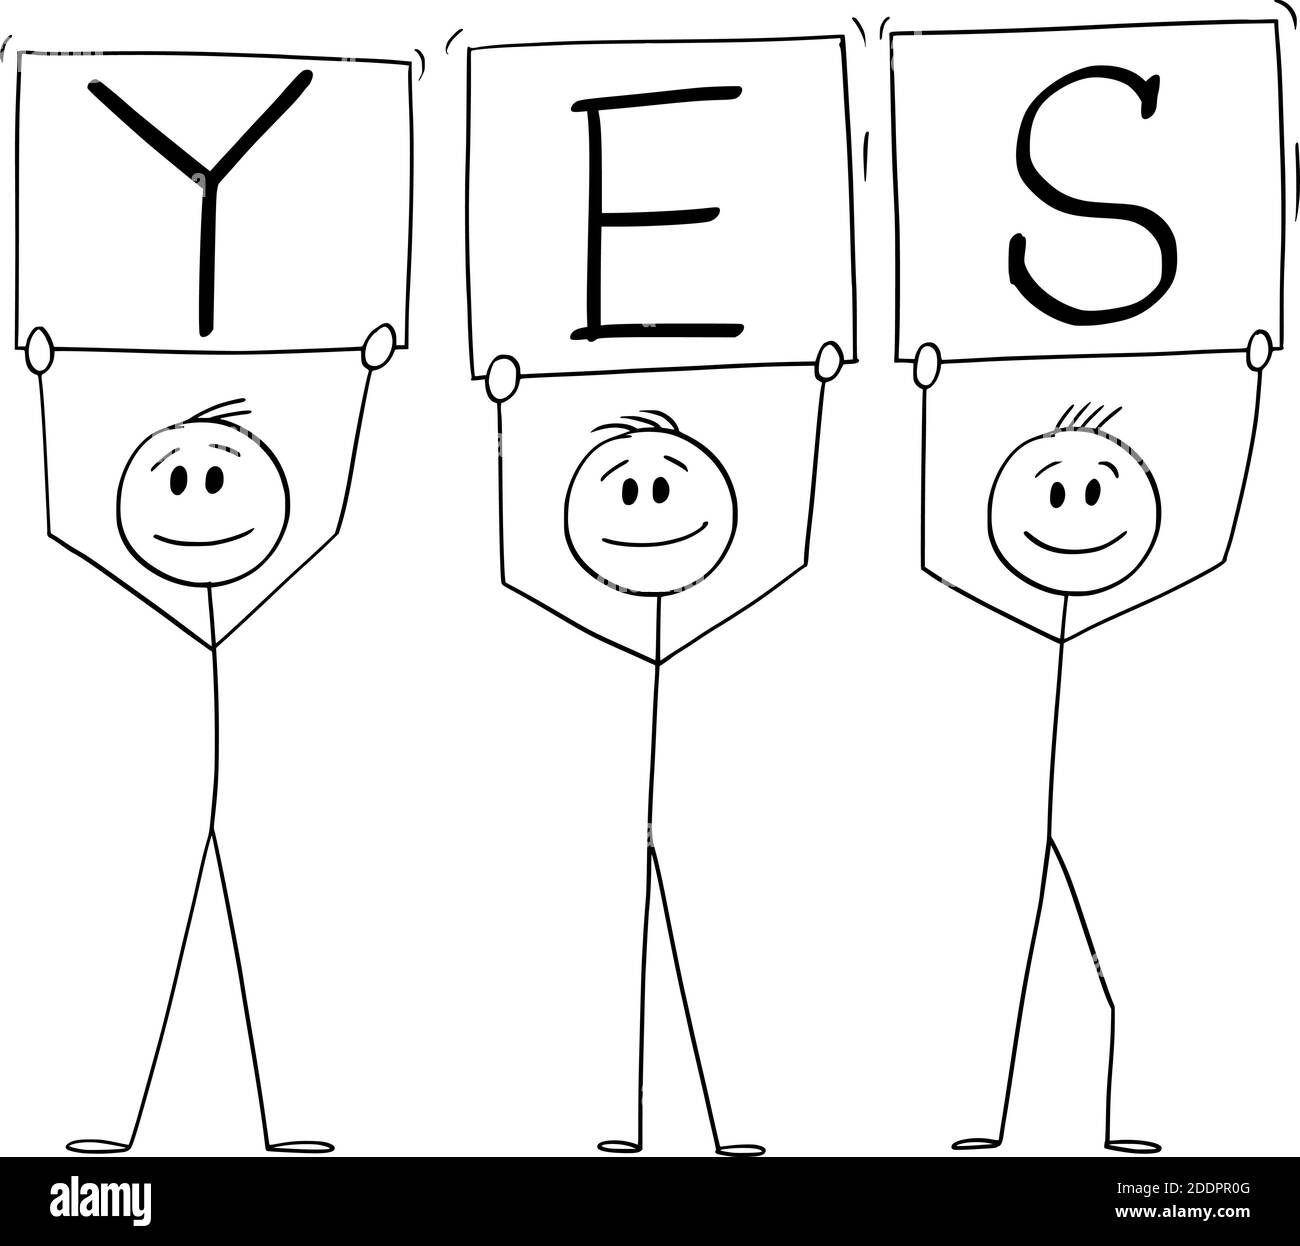 Vector cartoon stick figure illustration of three smiling positive men on demonstration holding yes signs. Stock Vector